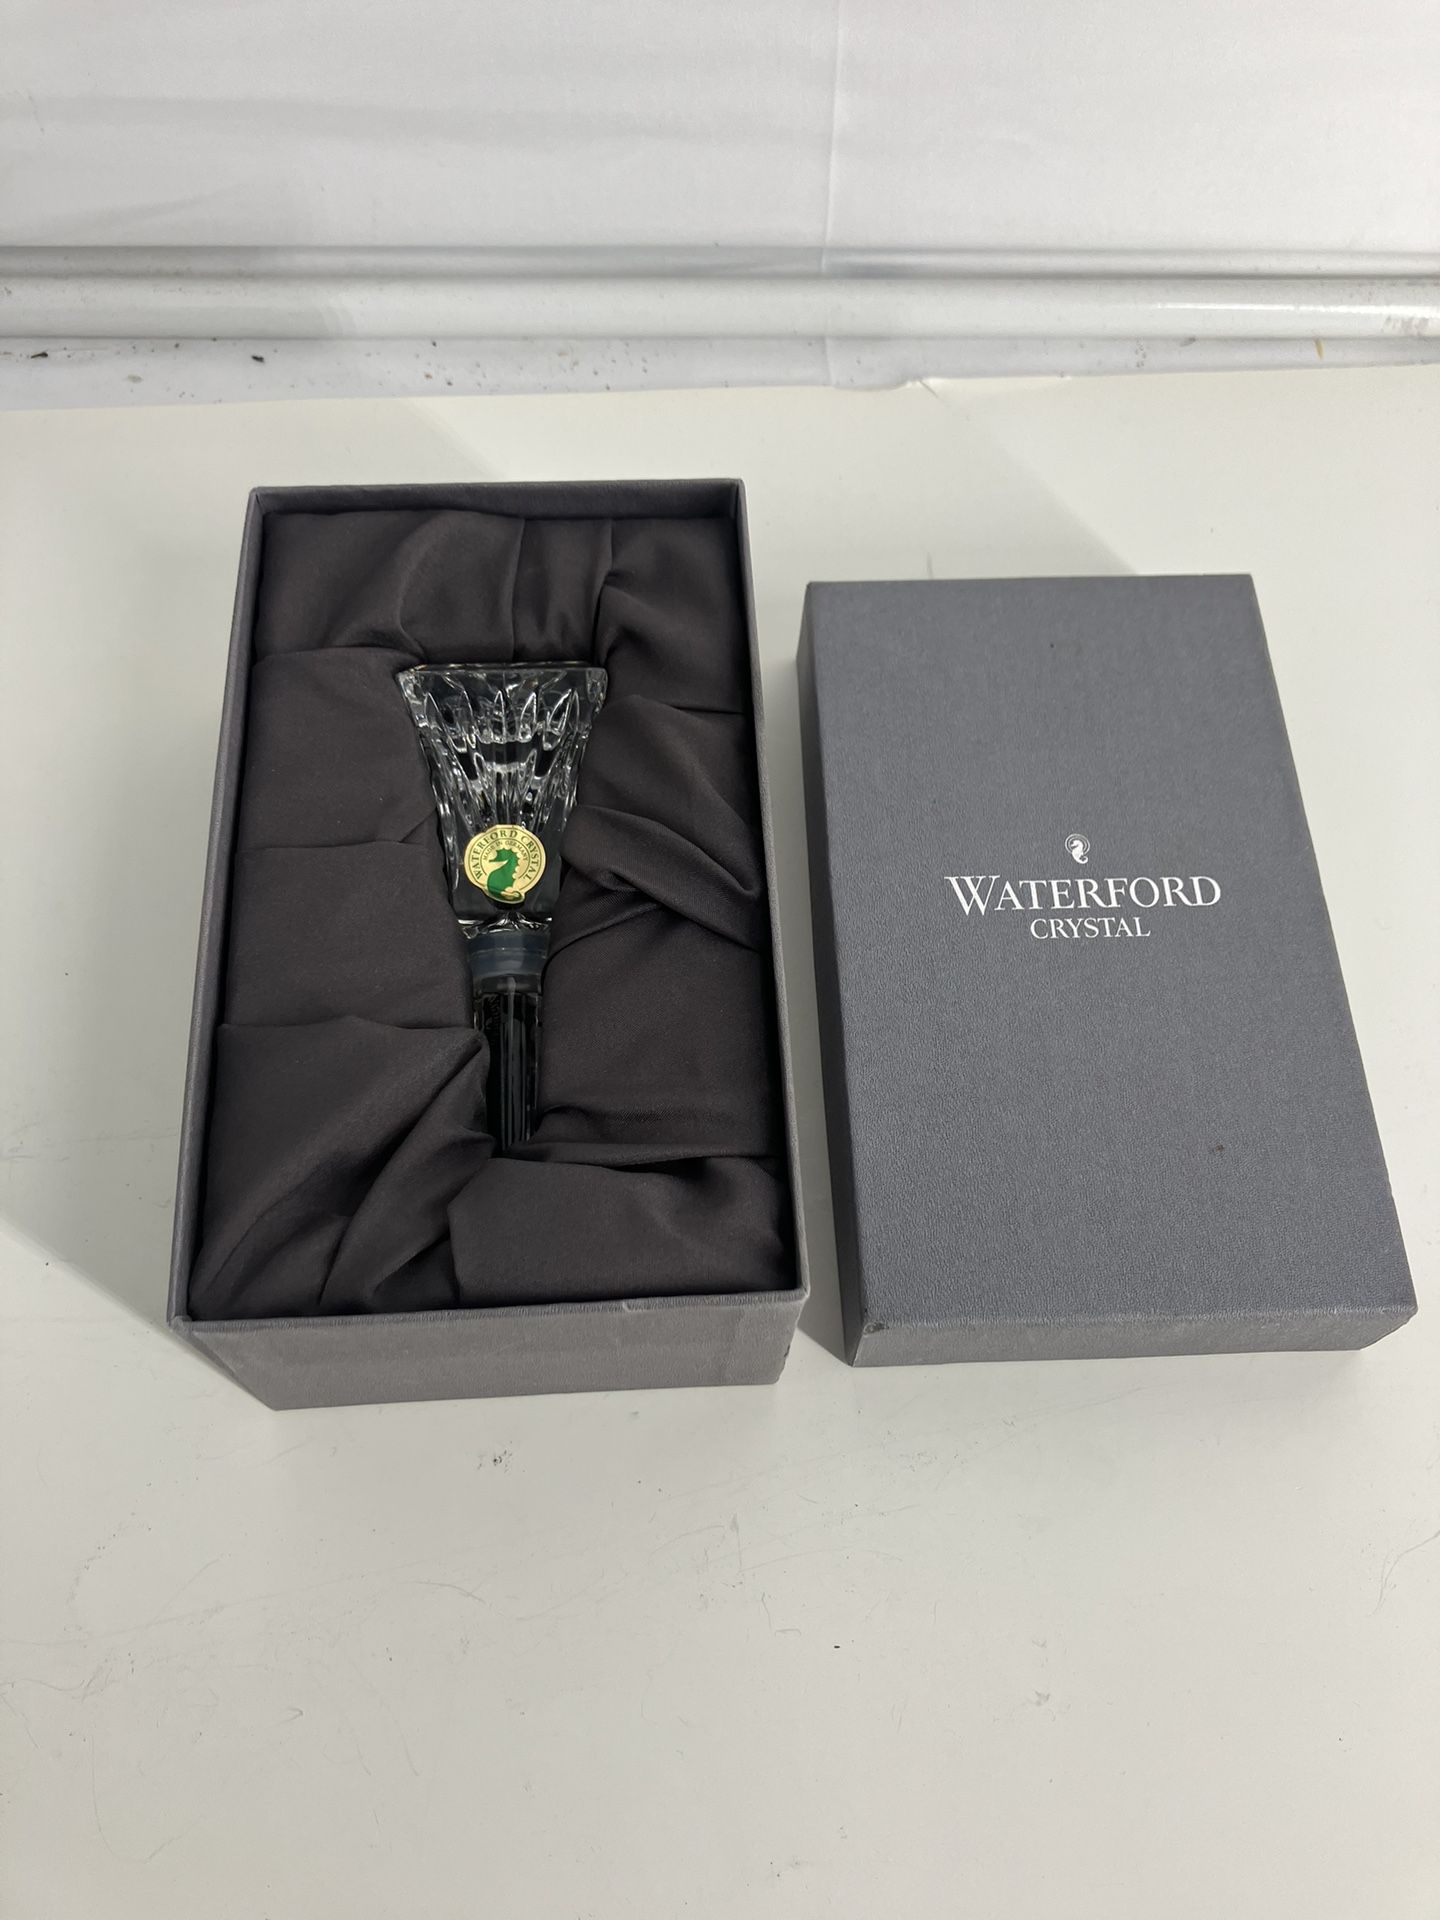 WATERFORD CRYSTAL WINE DECANTER REPLACEMENT STOPPER